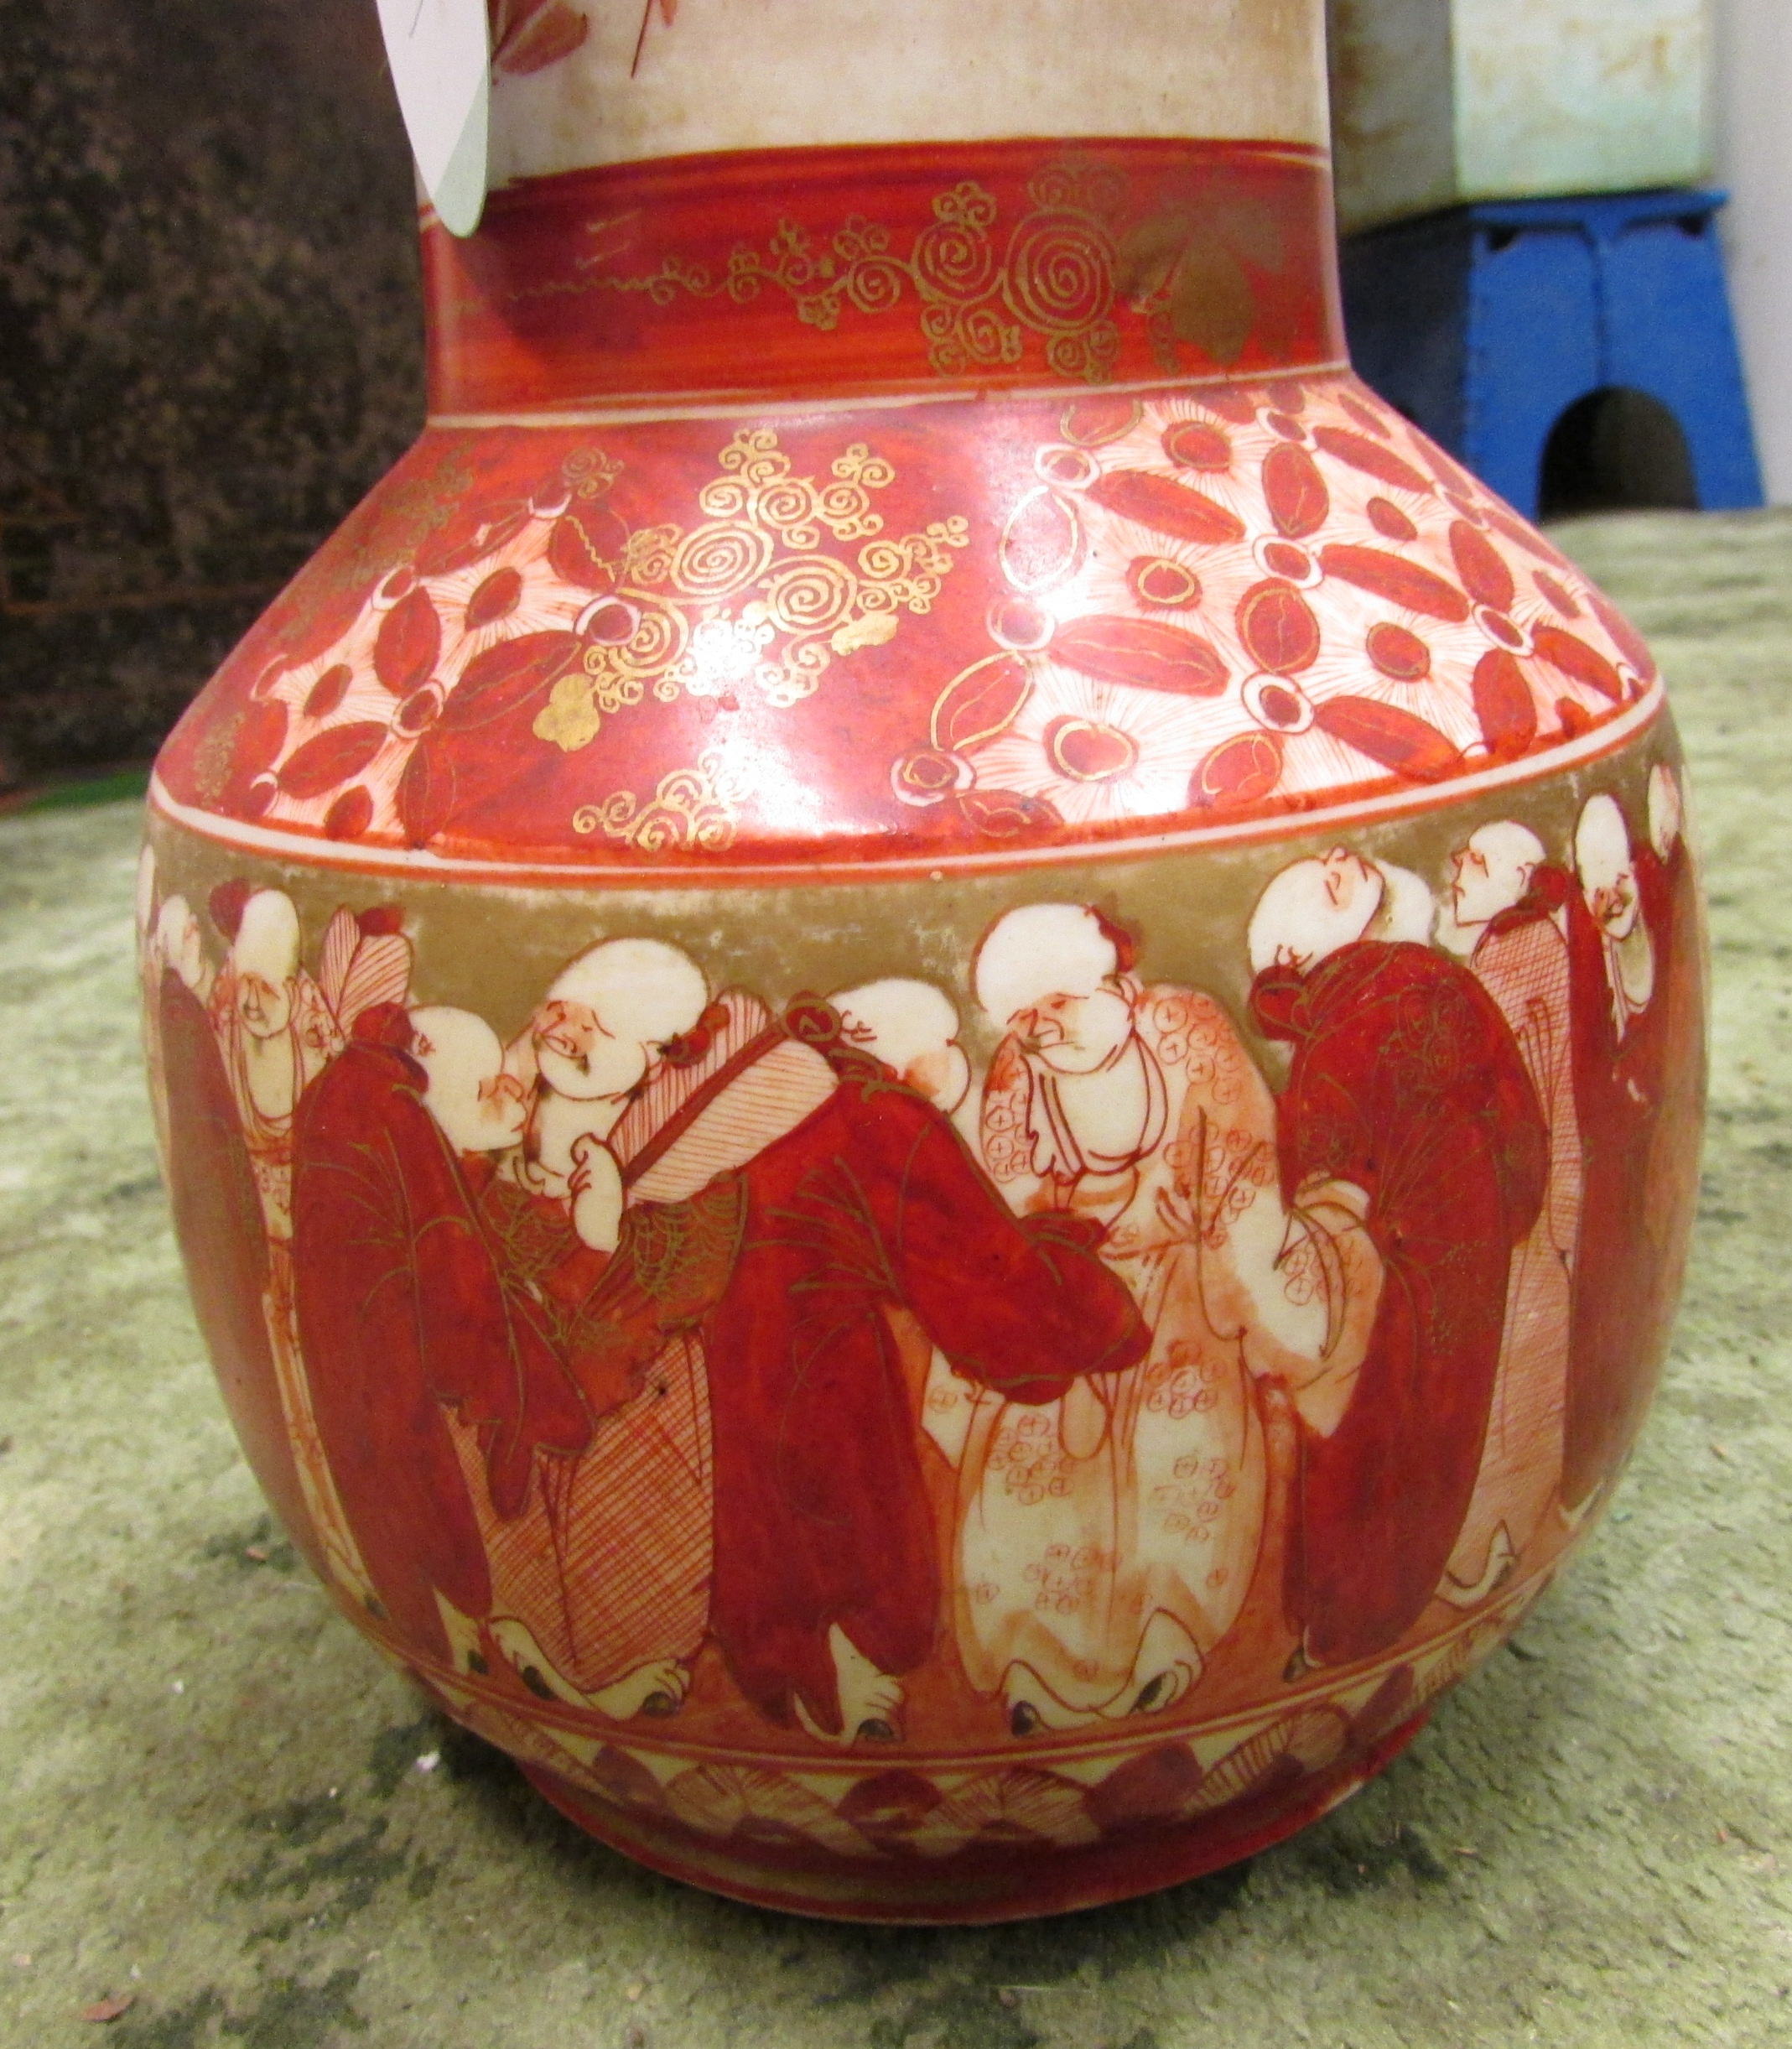 Three Chinese and Japanese porcelain vases converted to table lamps - the first a bottle vase - Image 5 of 12